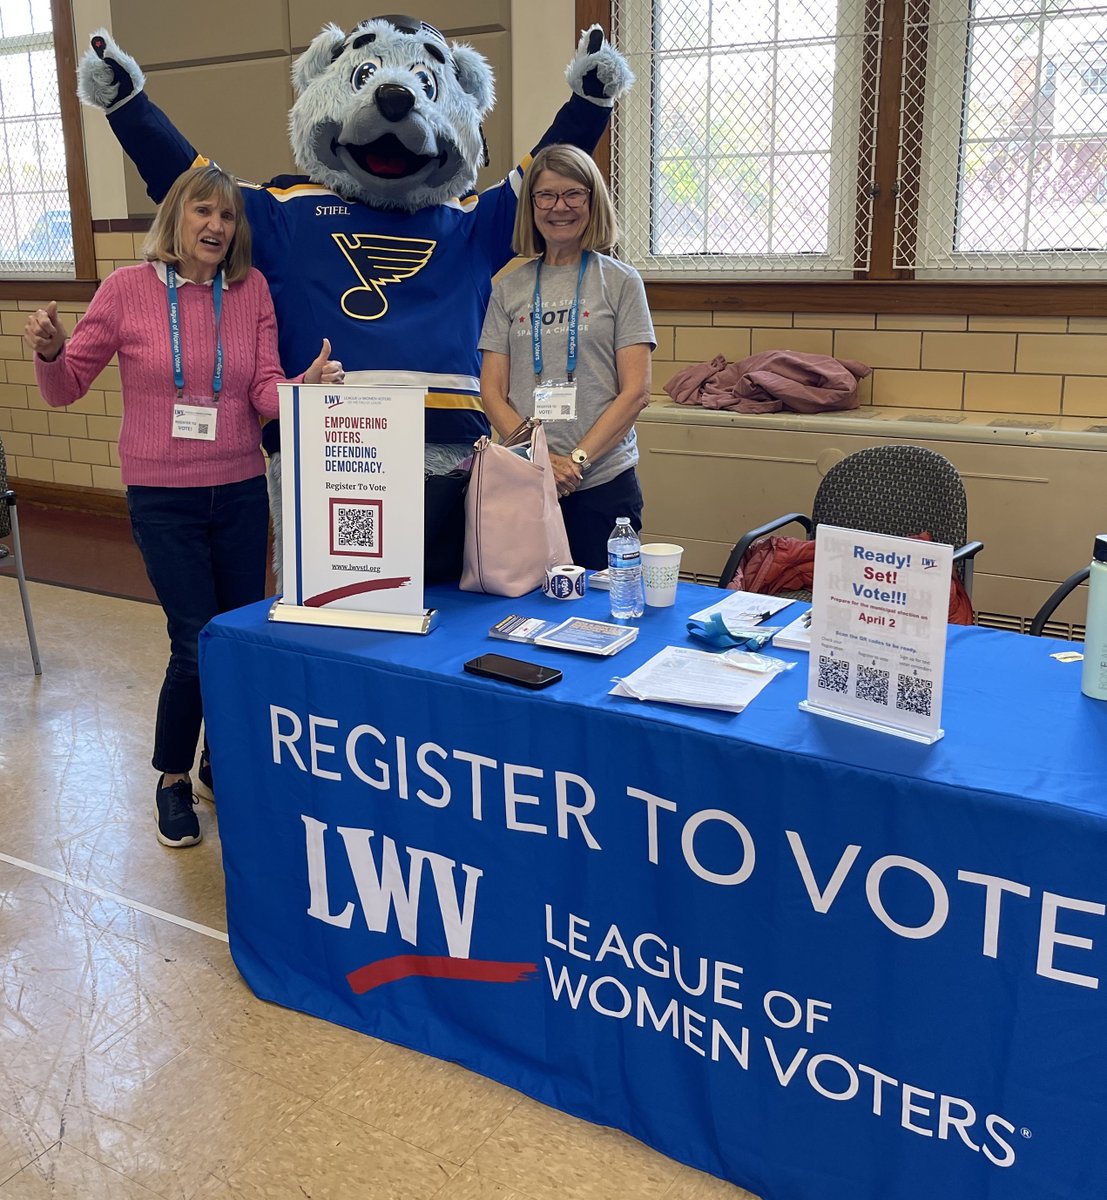 Gloria Garidel and Julie Gaebe met Louie the Bear and offered help with voter registration at a Girls Inc./Junior League event. @lwvstl #VOTE